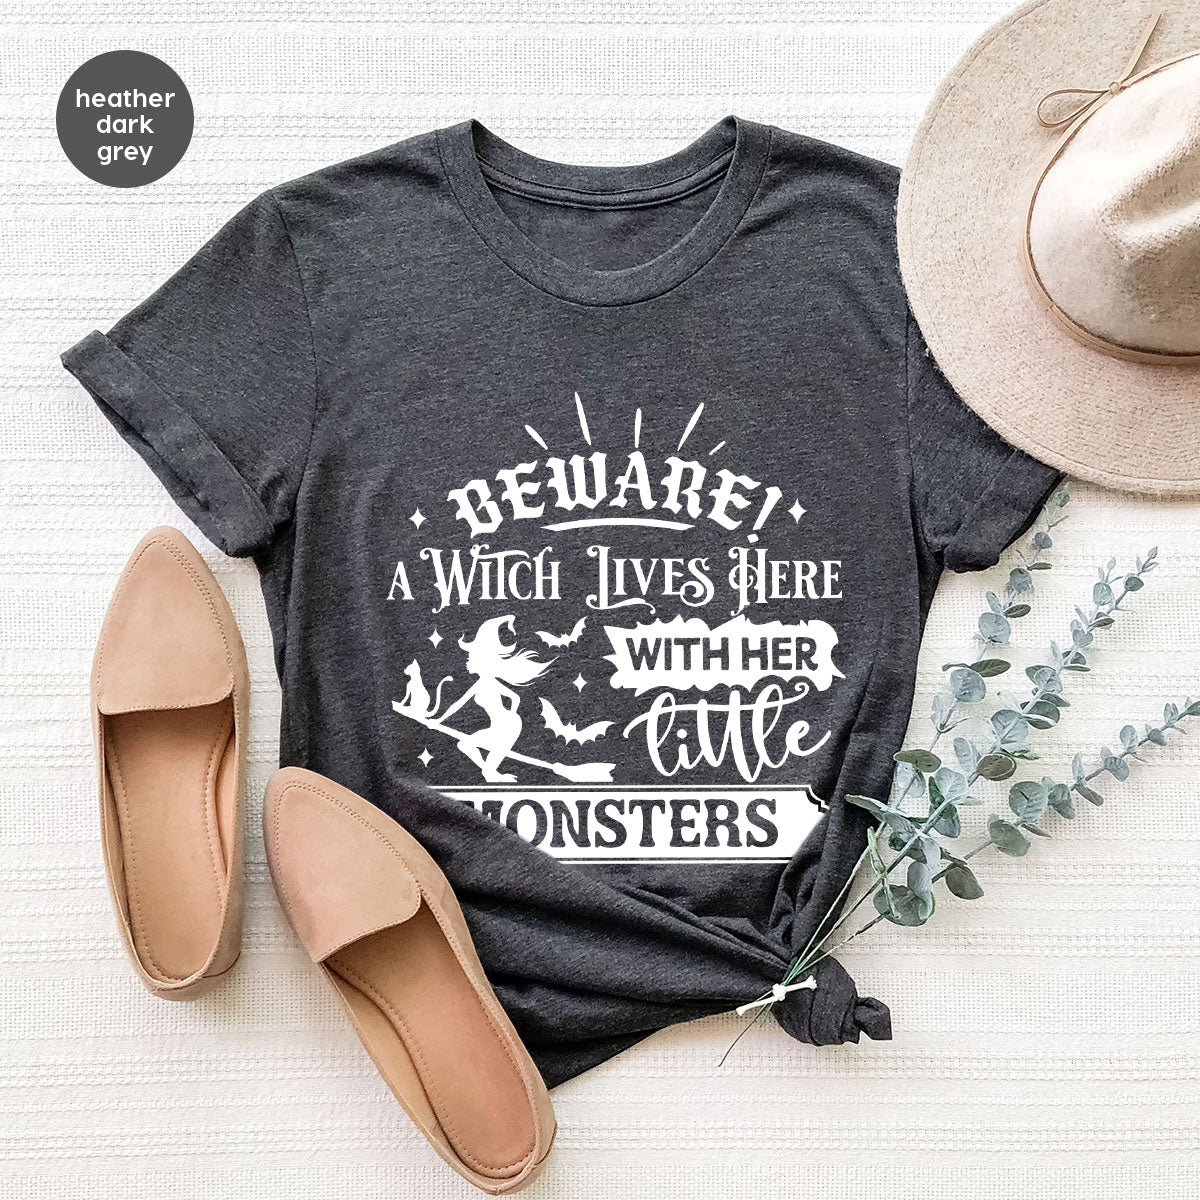 Funny Halloween Tshirts, Witch Shirt, Halloween Party Tshirt, Witchy T-Shirt, Apothecary Shoppe Clothing, Shirts for Women, Gift For Her